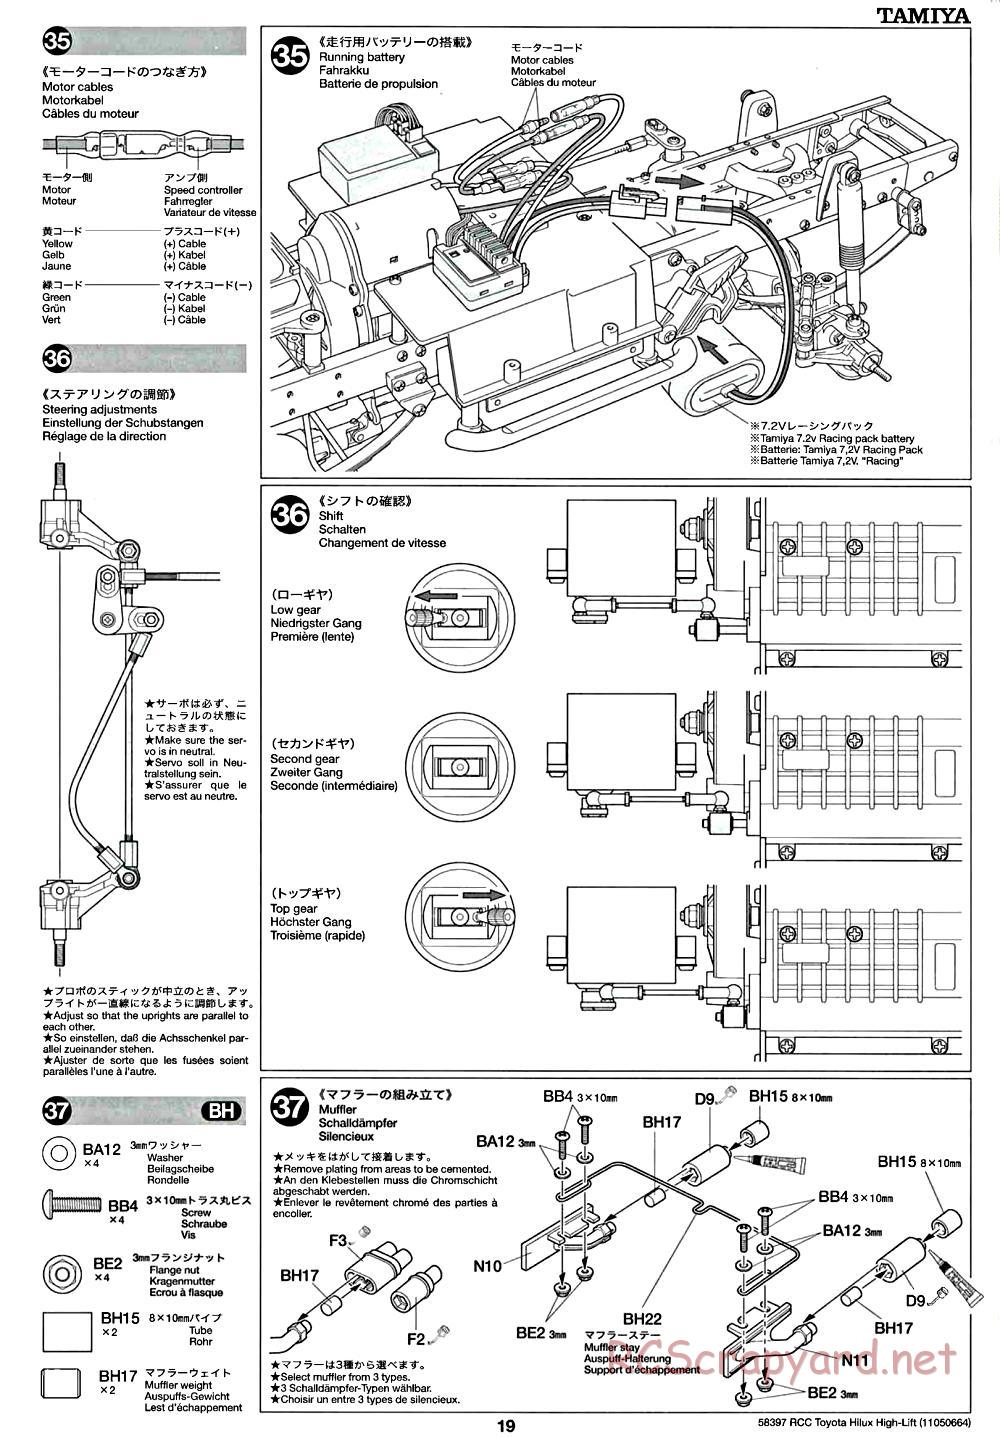 Tamiya - Toyota Hilux High-Lift Chassis - Manual - Page 19